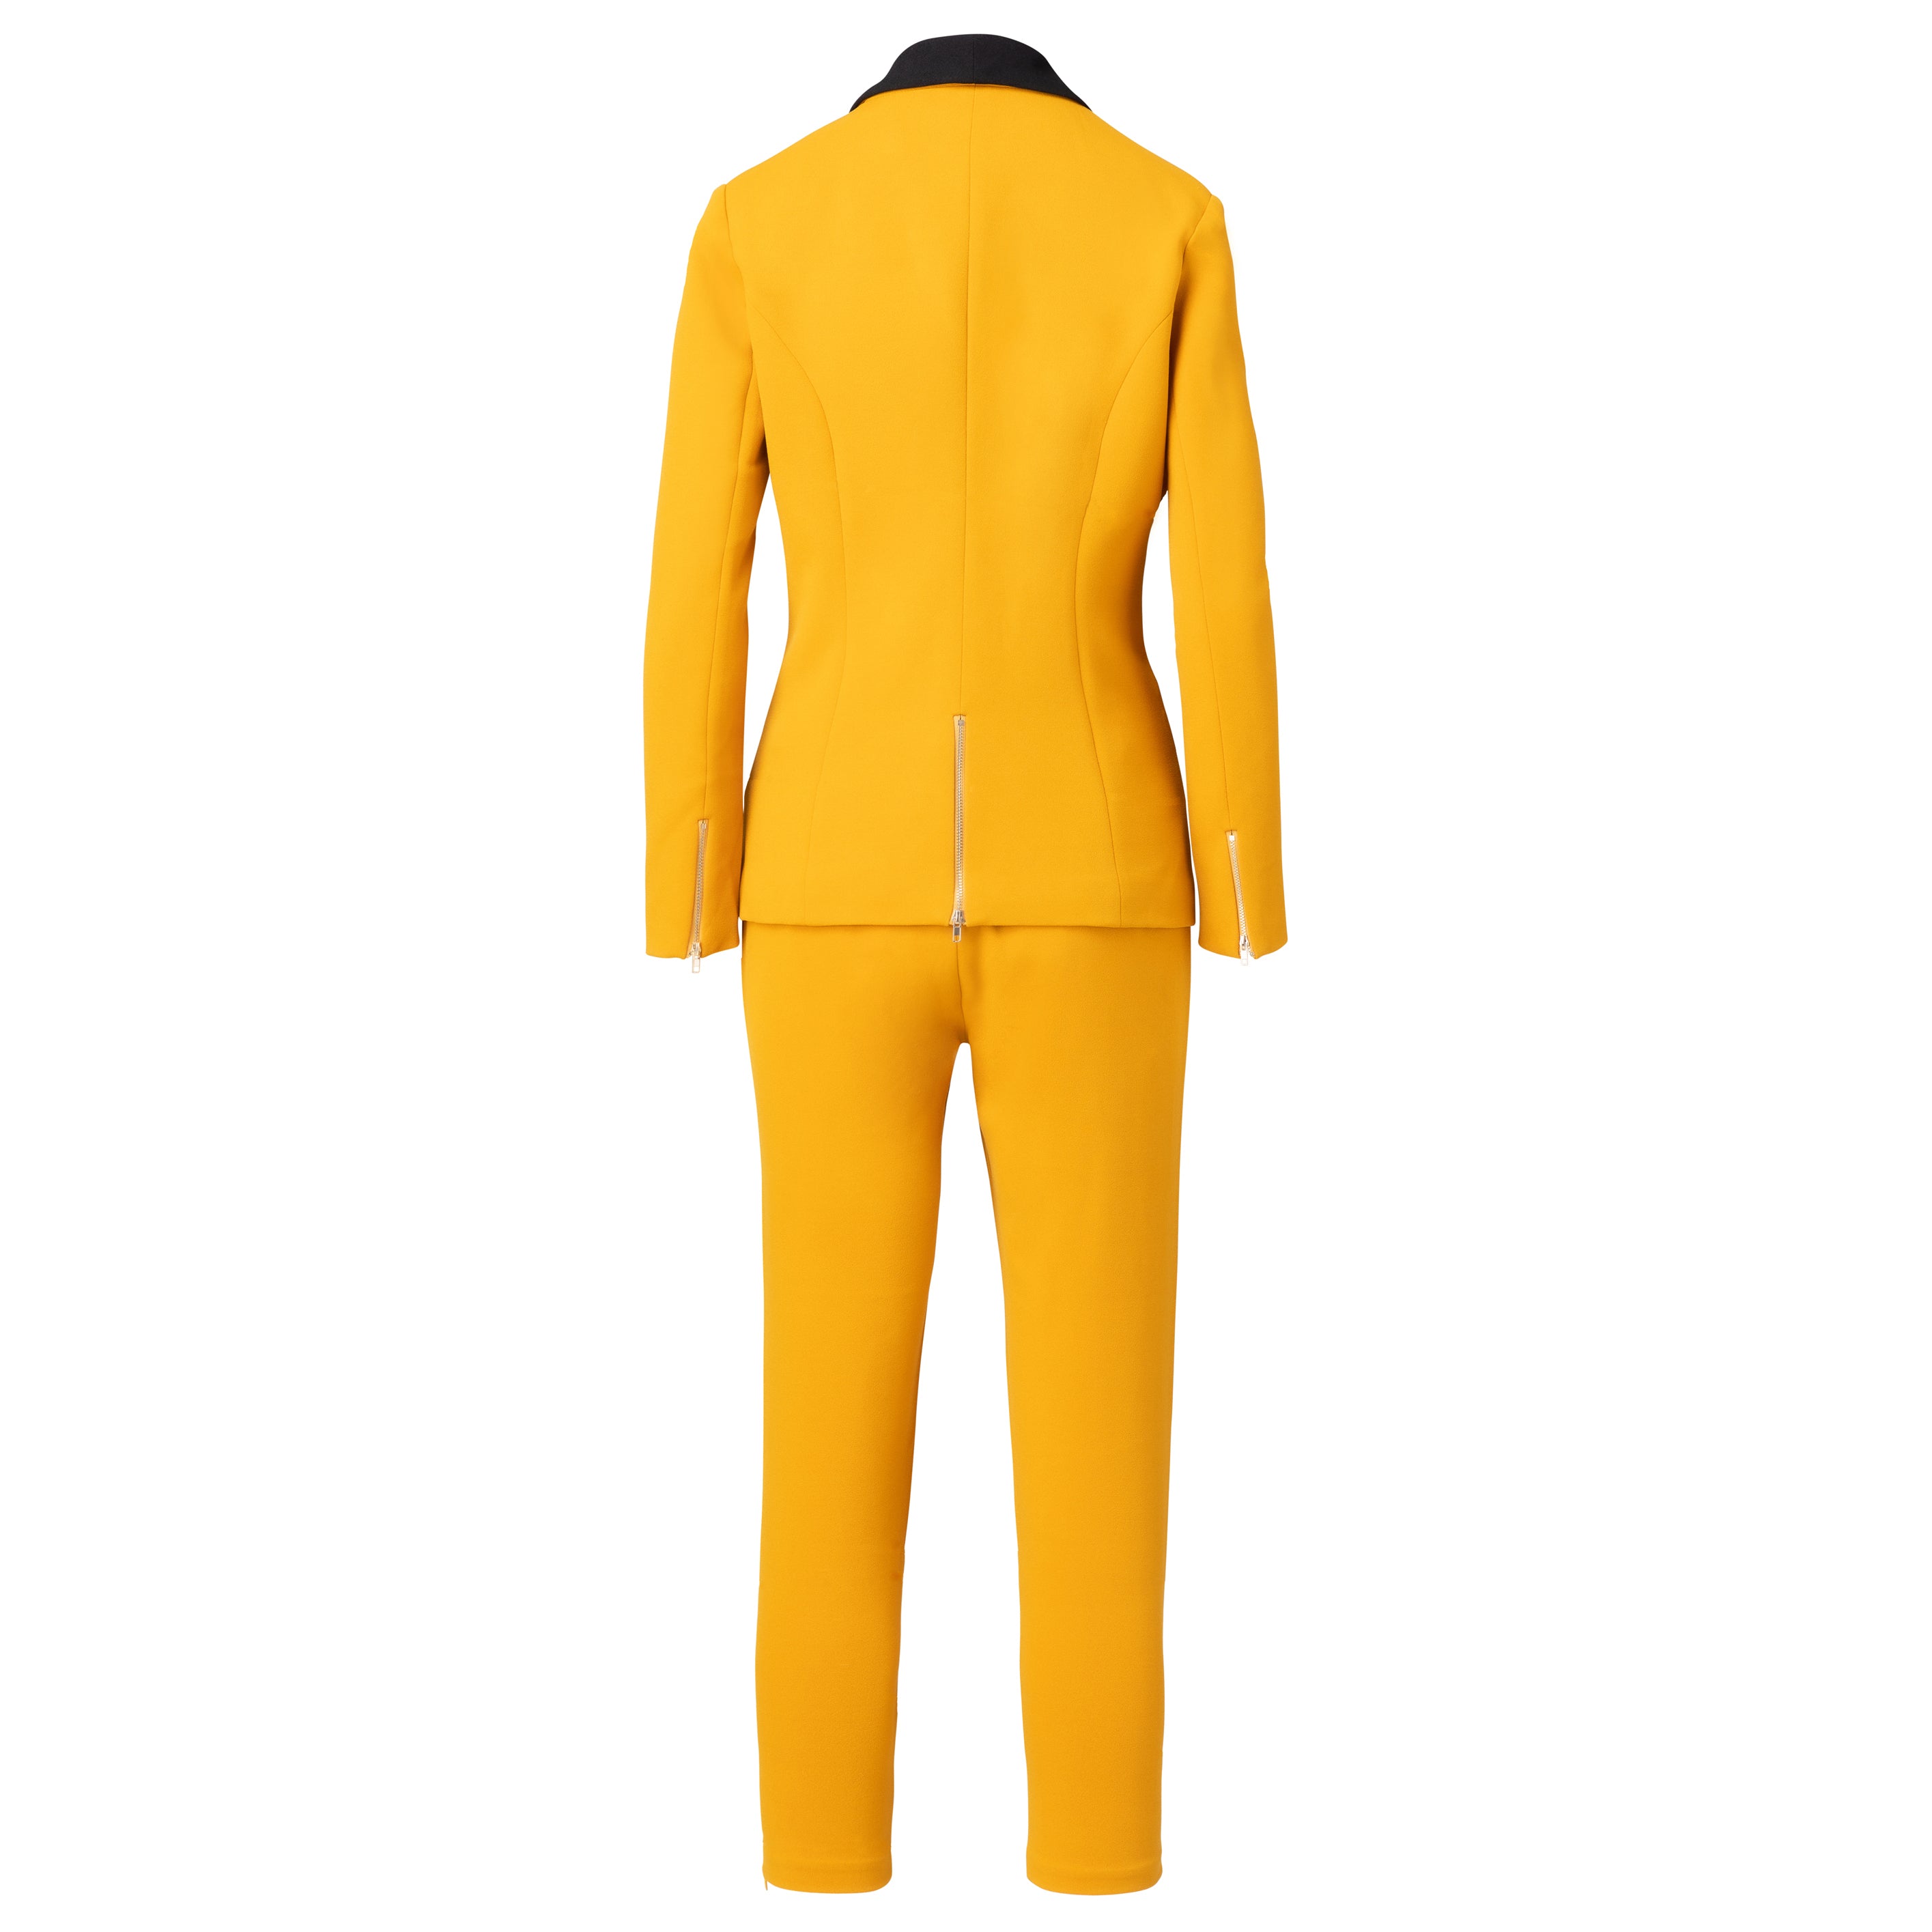 Yellow Suit Women's New Spring Fashion Dress Slim Business Suit Coat And  Trousers Office Women's Work Clothes - Pant Suits - AliExpress